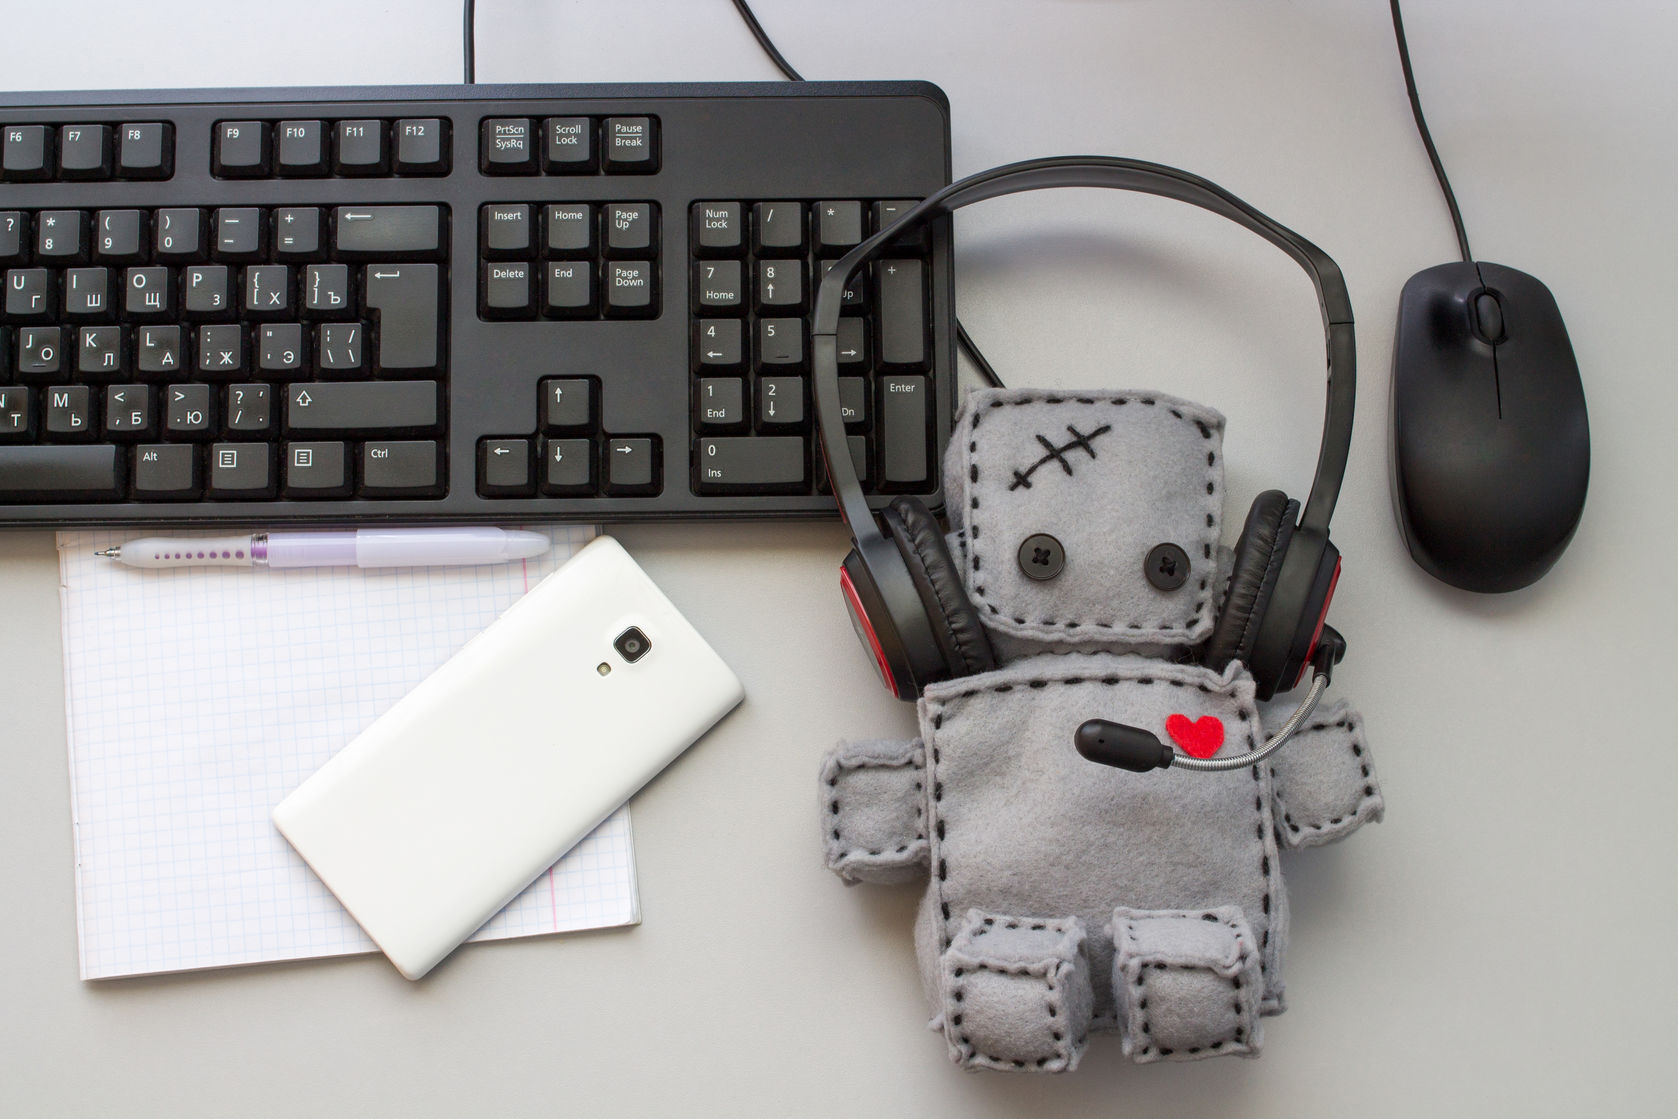 Soft Robot Toy work at Helpdesk. Flat Lay